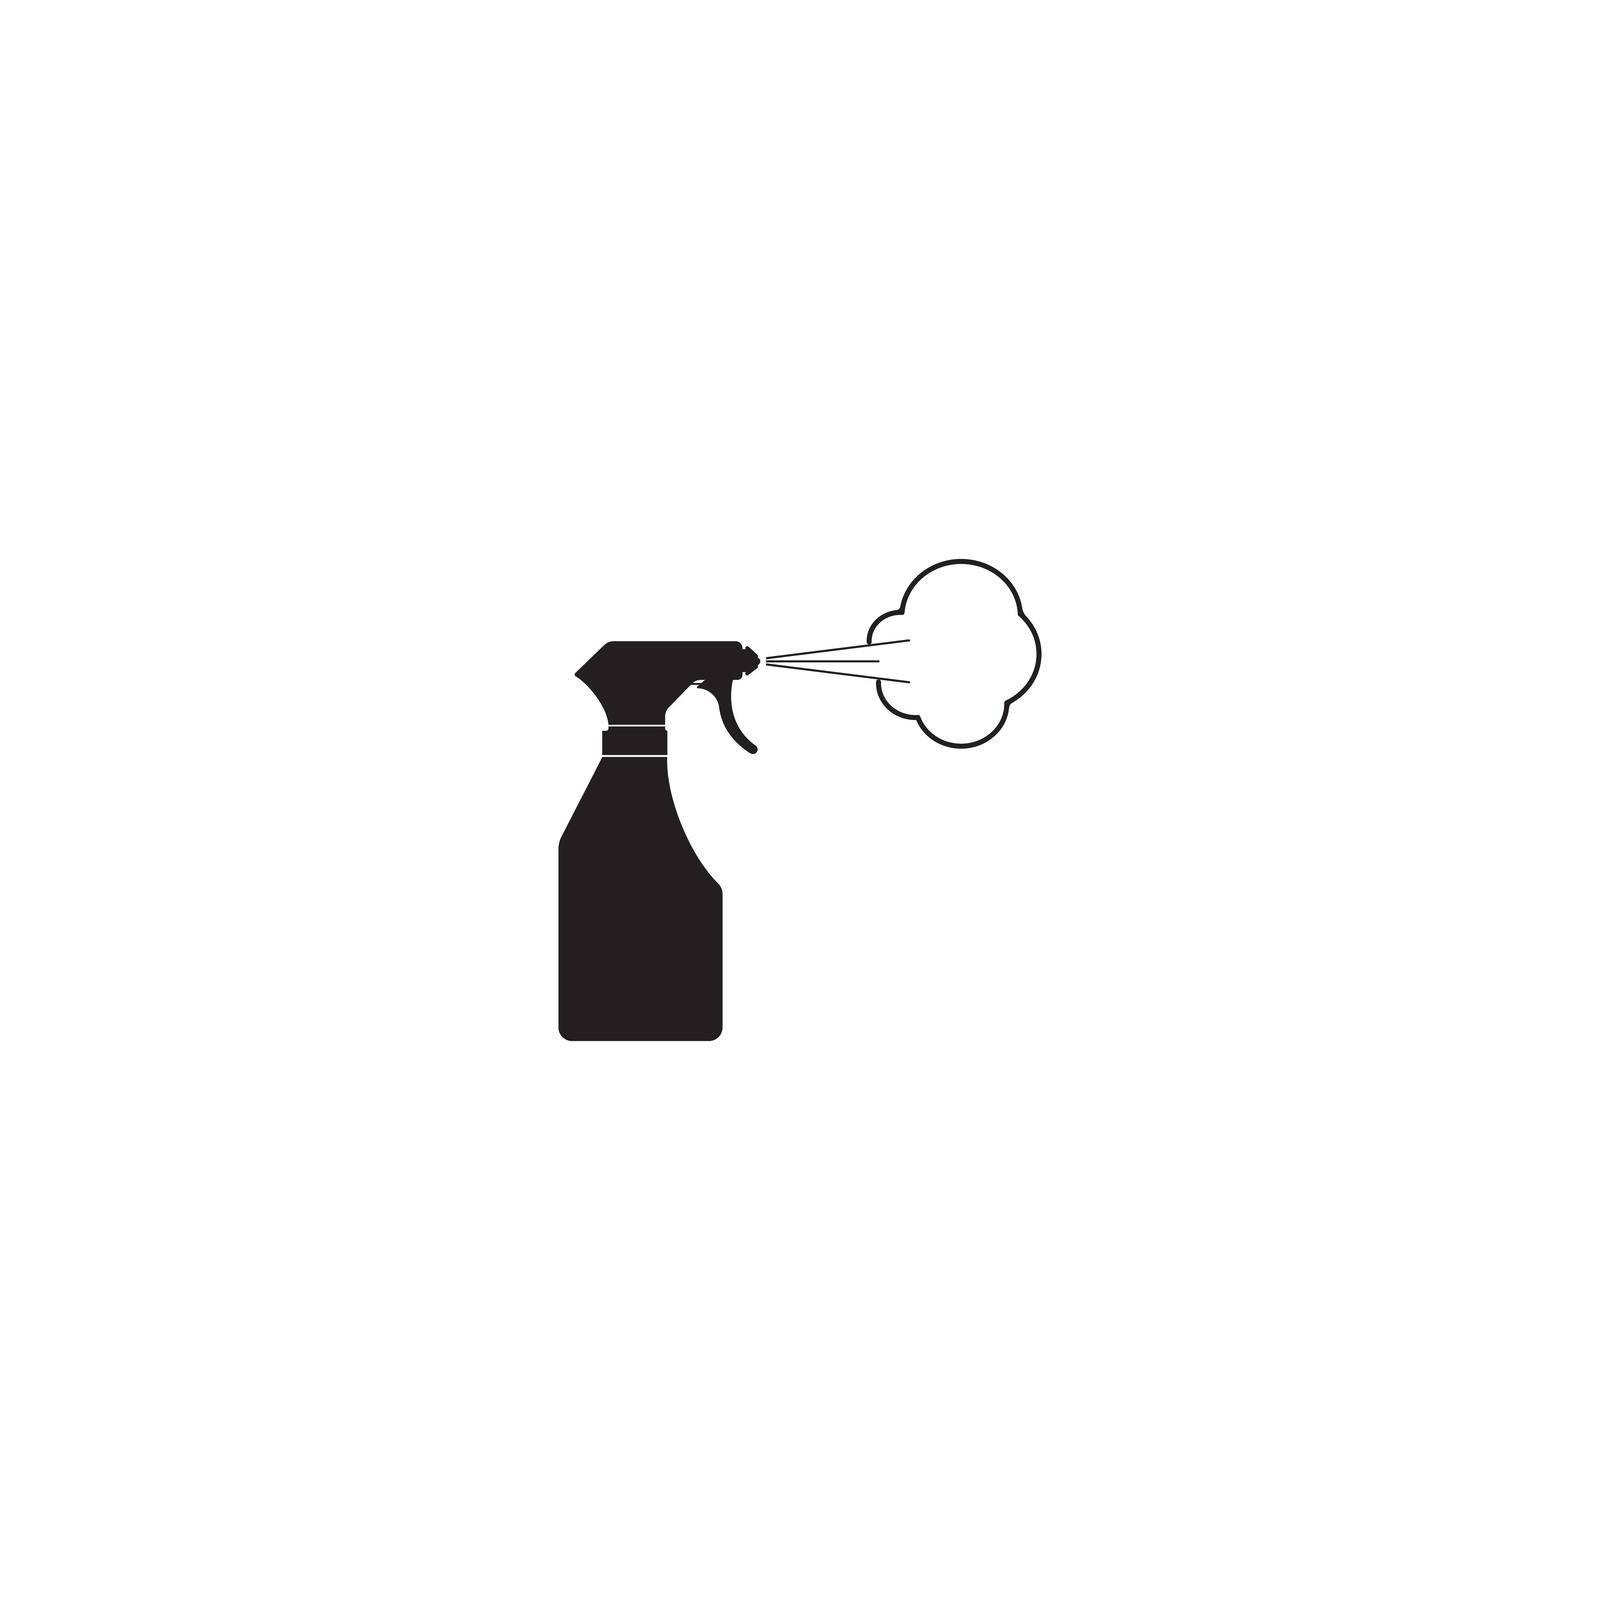 Spray Bottle icon. Simple illustration of bleach spray vector icon for web design isolated on white background